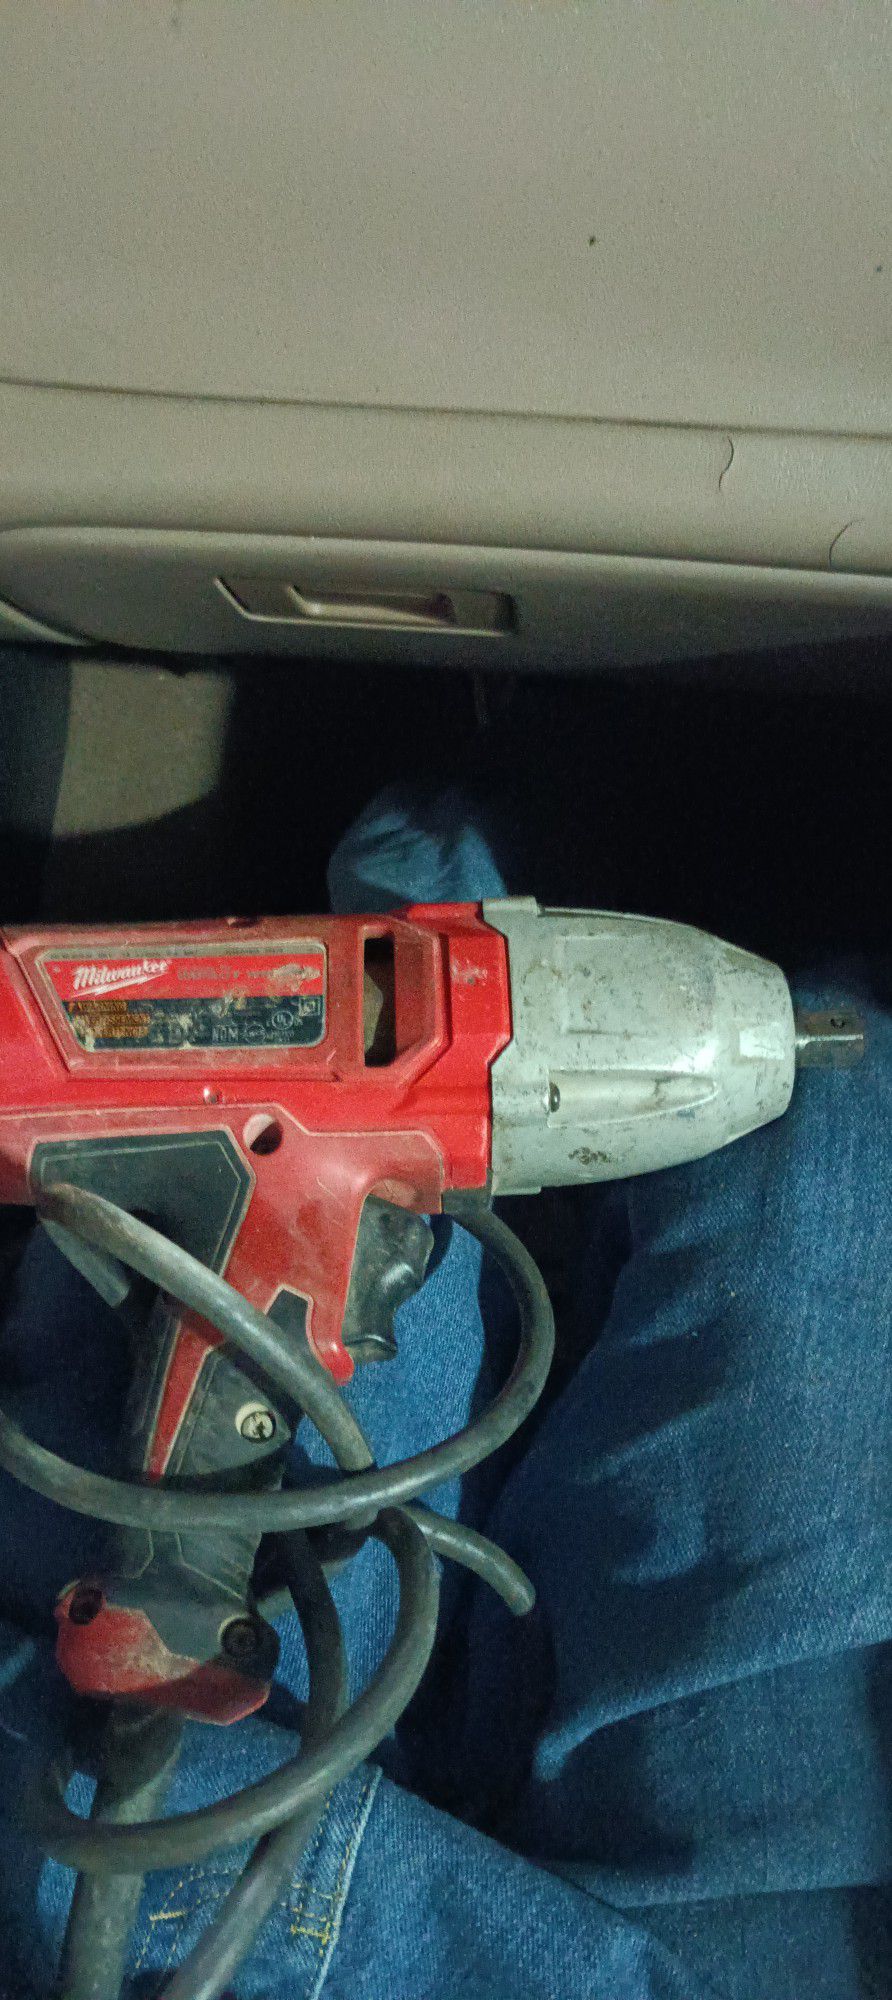 Milwakee 1/2 Inch Hammer Drill  Corded